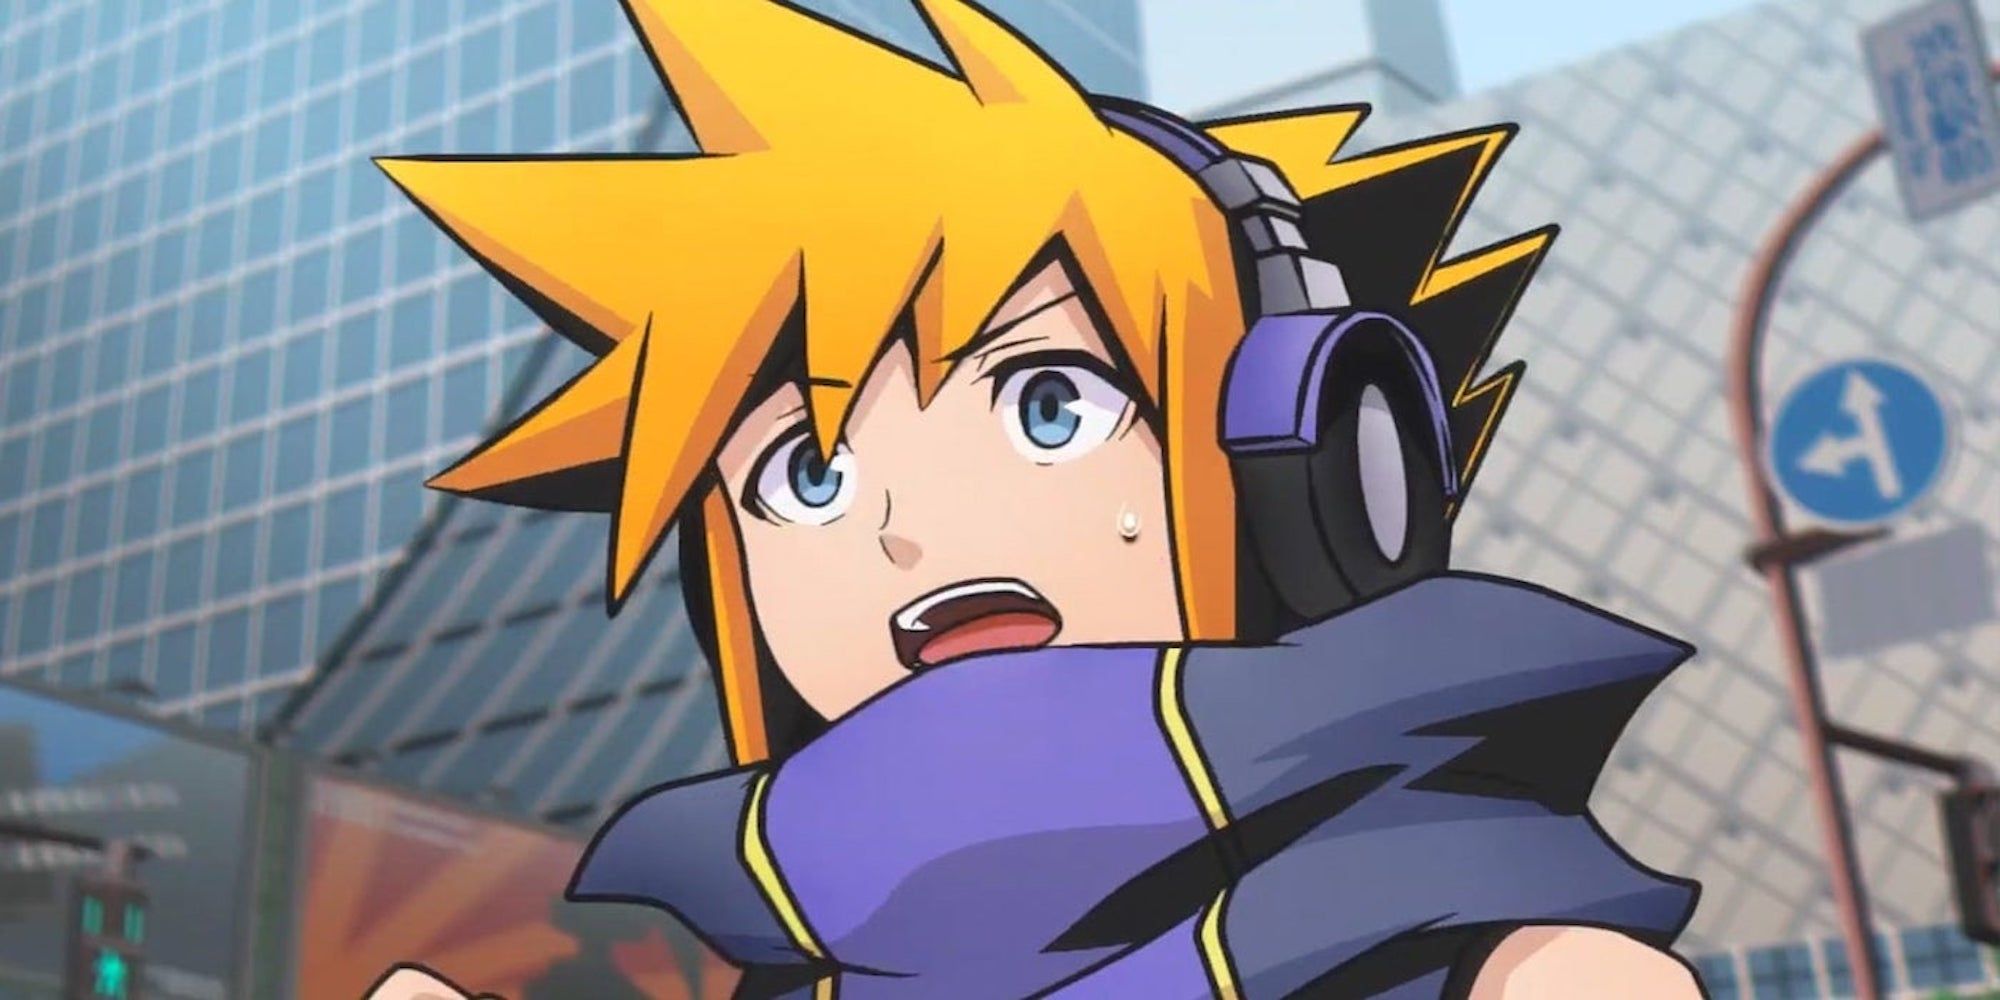 Neku from The World Ends With You